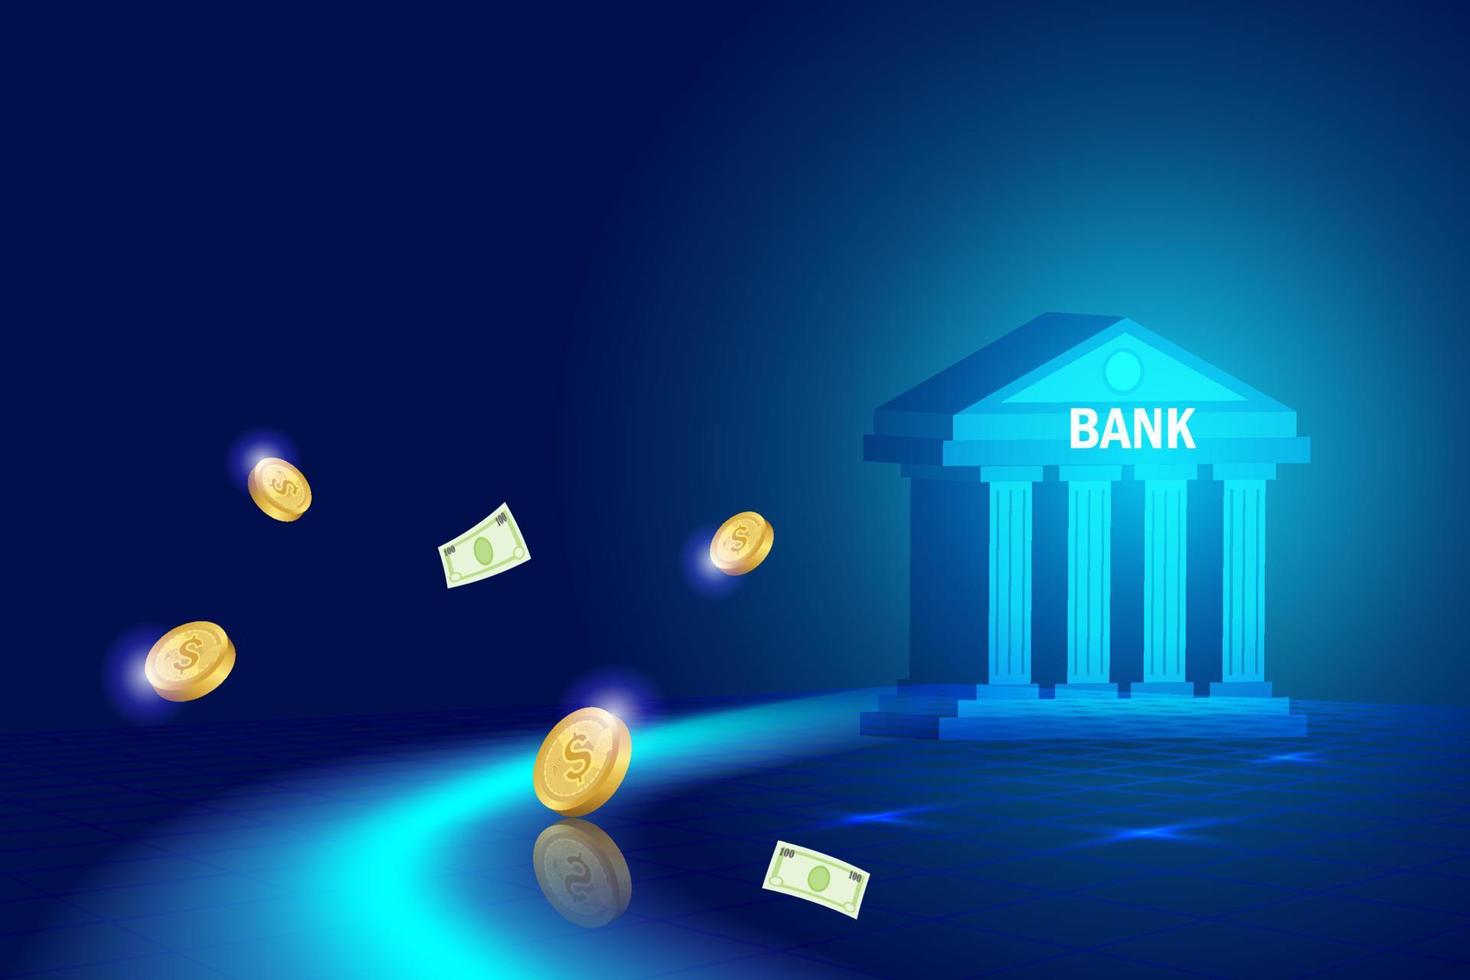 Digital finance and banking service in futuristic background. Bank building with online payment transaction, secure money and financial innovation technology. vector